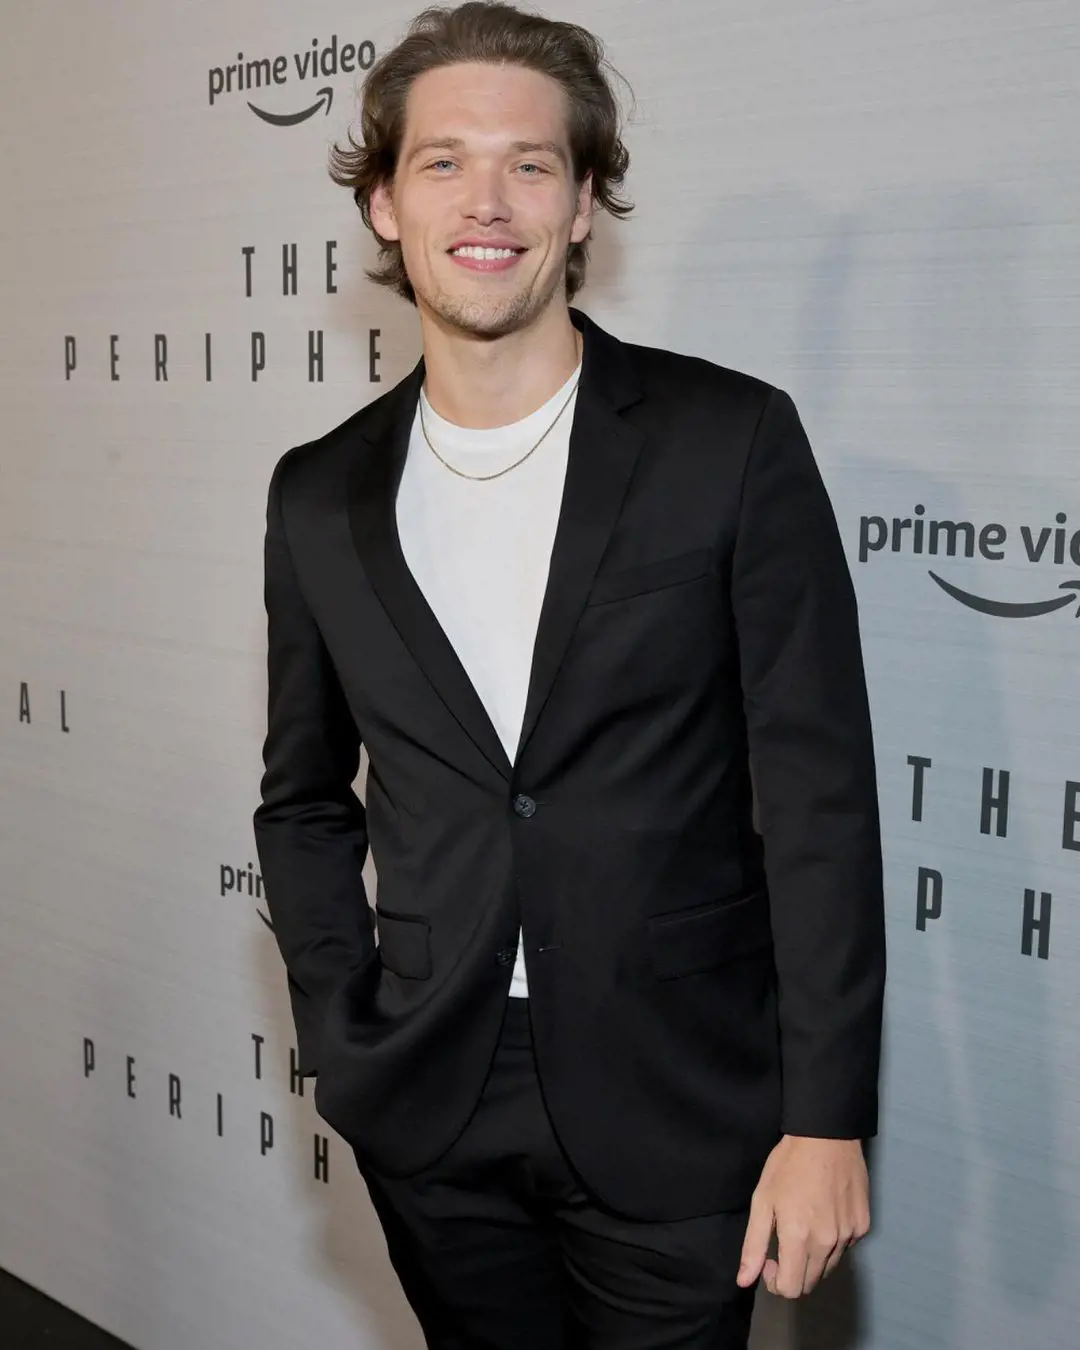 Cameron attended a premiere at Los Angeles on October 25,2022 